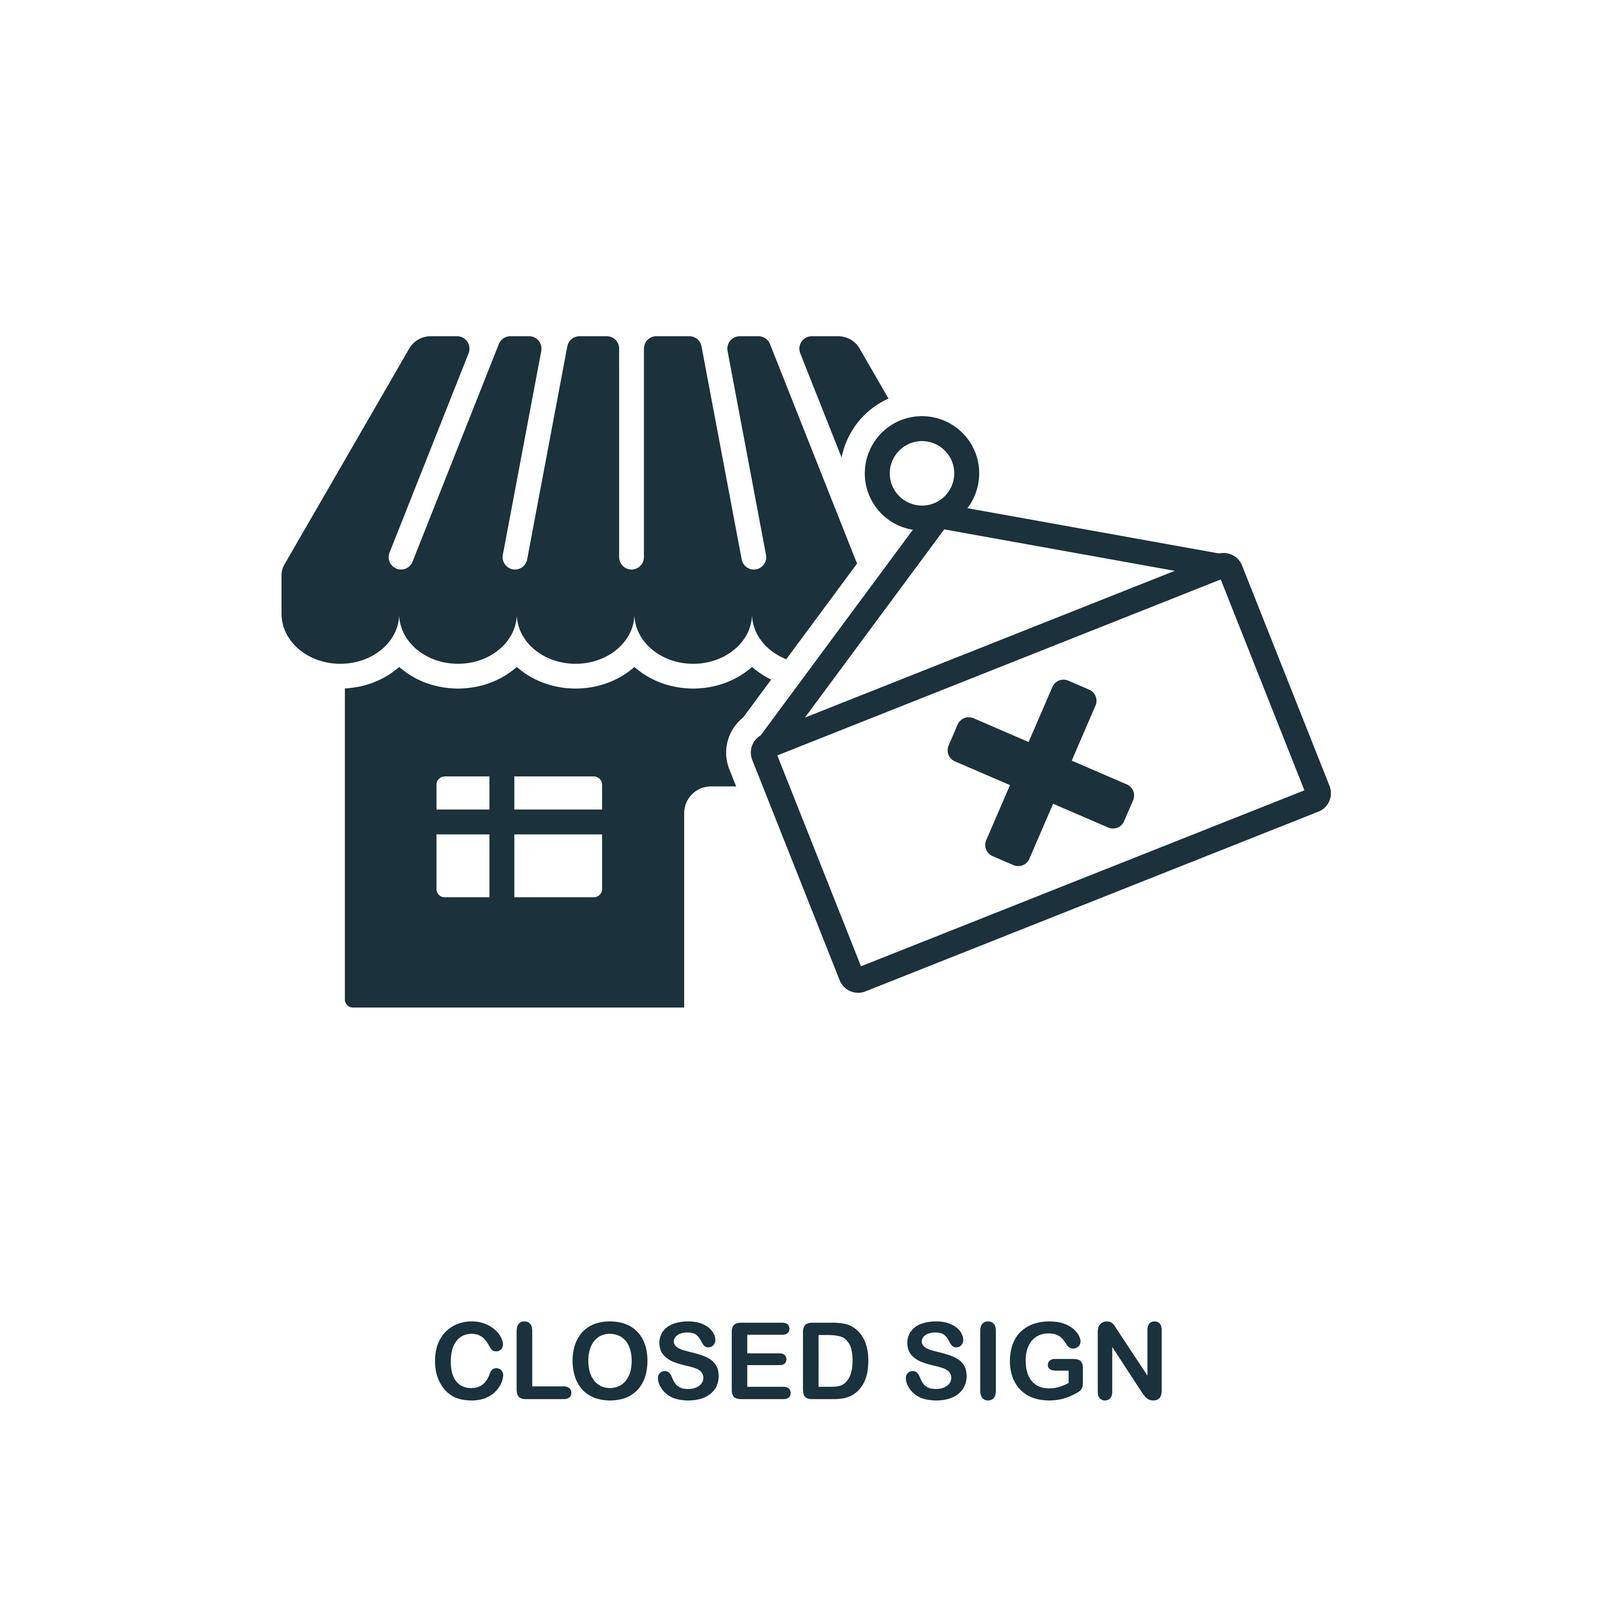 Closed Sign icon. Monochrome sign from lockdown collection. Creative Closed Sign icon illustration for web design, infographics and more by simakovavector